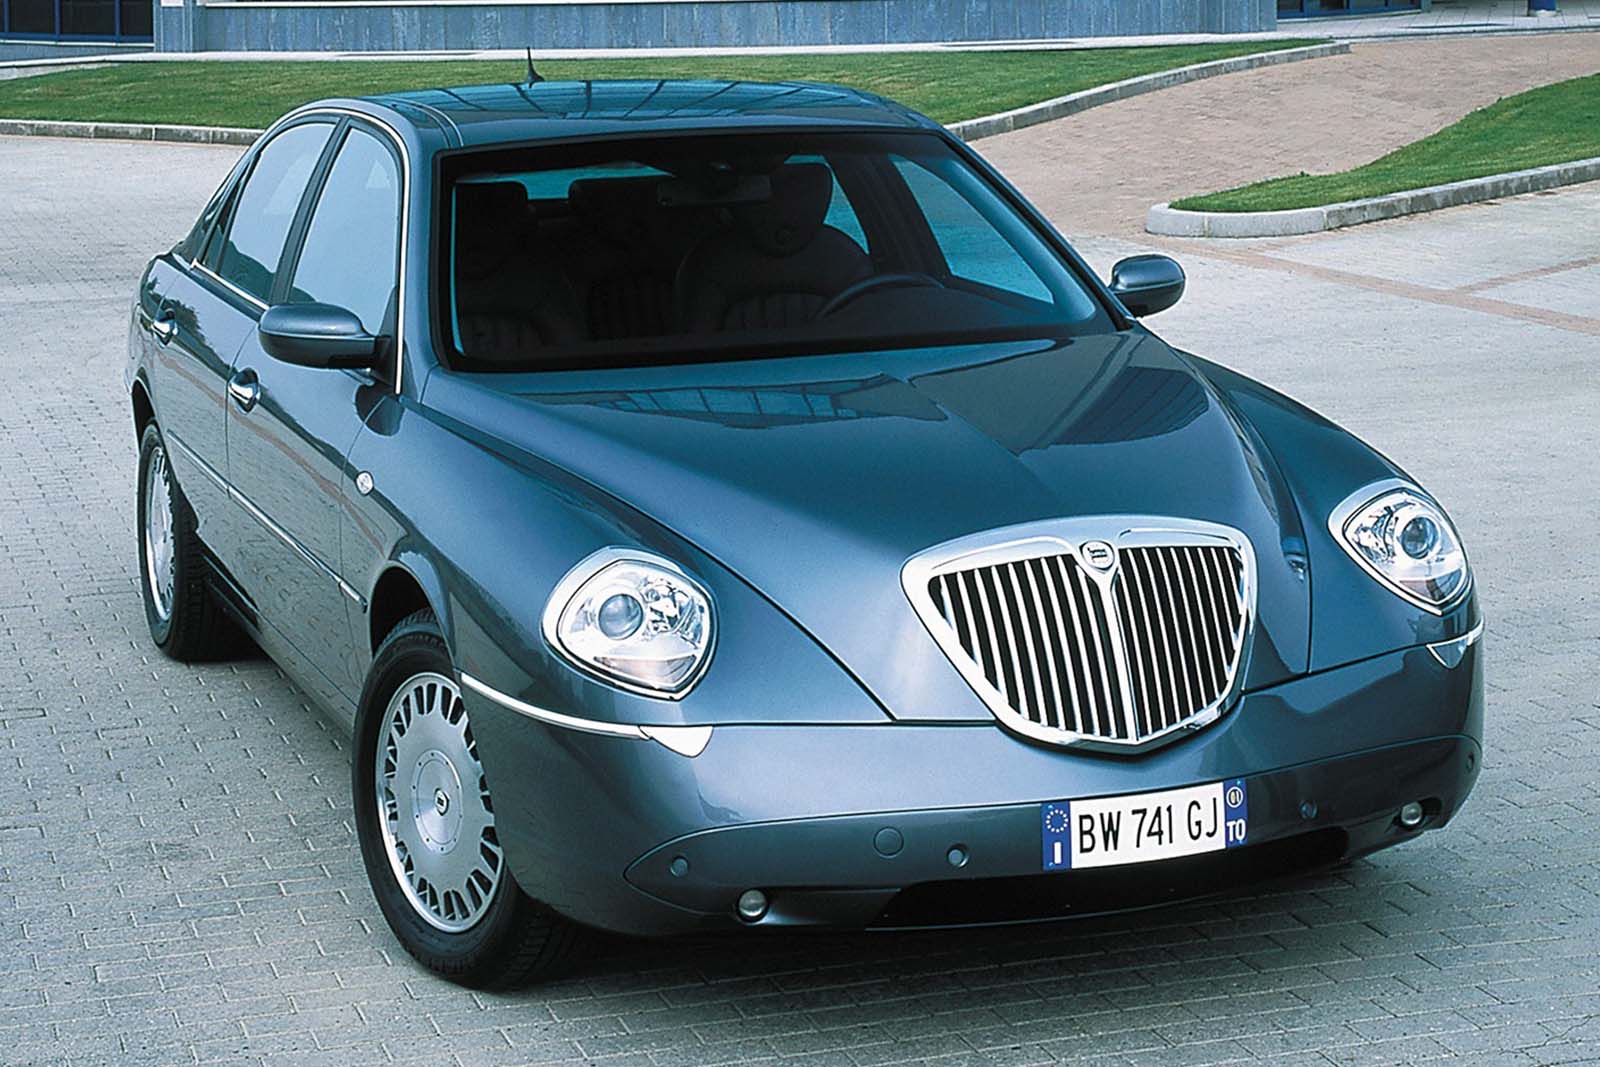 <p>Compared with the Thesis, few cars from <a href="https://www.autocar.co.uk/car-review/new-car-reviews/lancia">Lancia</a> had so much time and money invested in them.</p><p>A a car of slightly mysterious allure but plenty of technology, it was developed on its own bespoke chassis and the same sort of suspension used in the <a href="https://www.autocar.co.uk/car-review/maserati">Maserati</a> Spyder, <a href="https://www.autocar.co.uk/car-review/maserati/granturismo">Granturismo</a> and <a href="https://www.autocar.co.uk/car-review/maserati/quattroporte">Quattroporte</a>. It even had radar-guided cruise control - the first Lancia to do so.</p><p>Despite the effort and attention lavished on it to make it a true rival for the <a href="https://www.autocar.co.uk/car-review/bmw/5-series">BMW 5 Series</a> and <a href="https://www.autocar.co.uk/car-review/mercedes-benz/e-class">Mercedes E-Class</a>, it was dropped from the price list after eight years with less than 20,000 produced.</p><p>We therefore thought it best to find out why, partly because it has never been sold in the UK, partly because it’s a relatively rare sight even in its native Italy, and partly because it looks a little weird.</p>